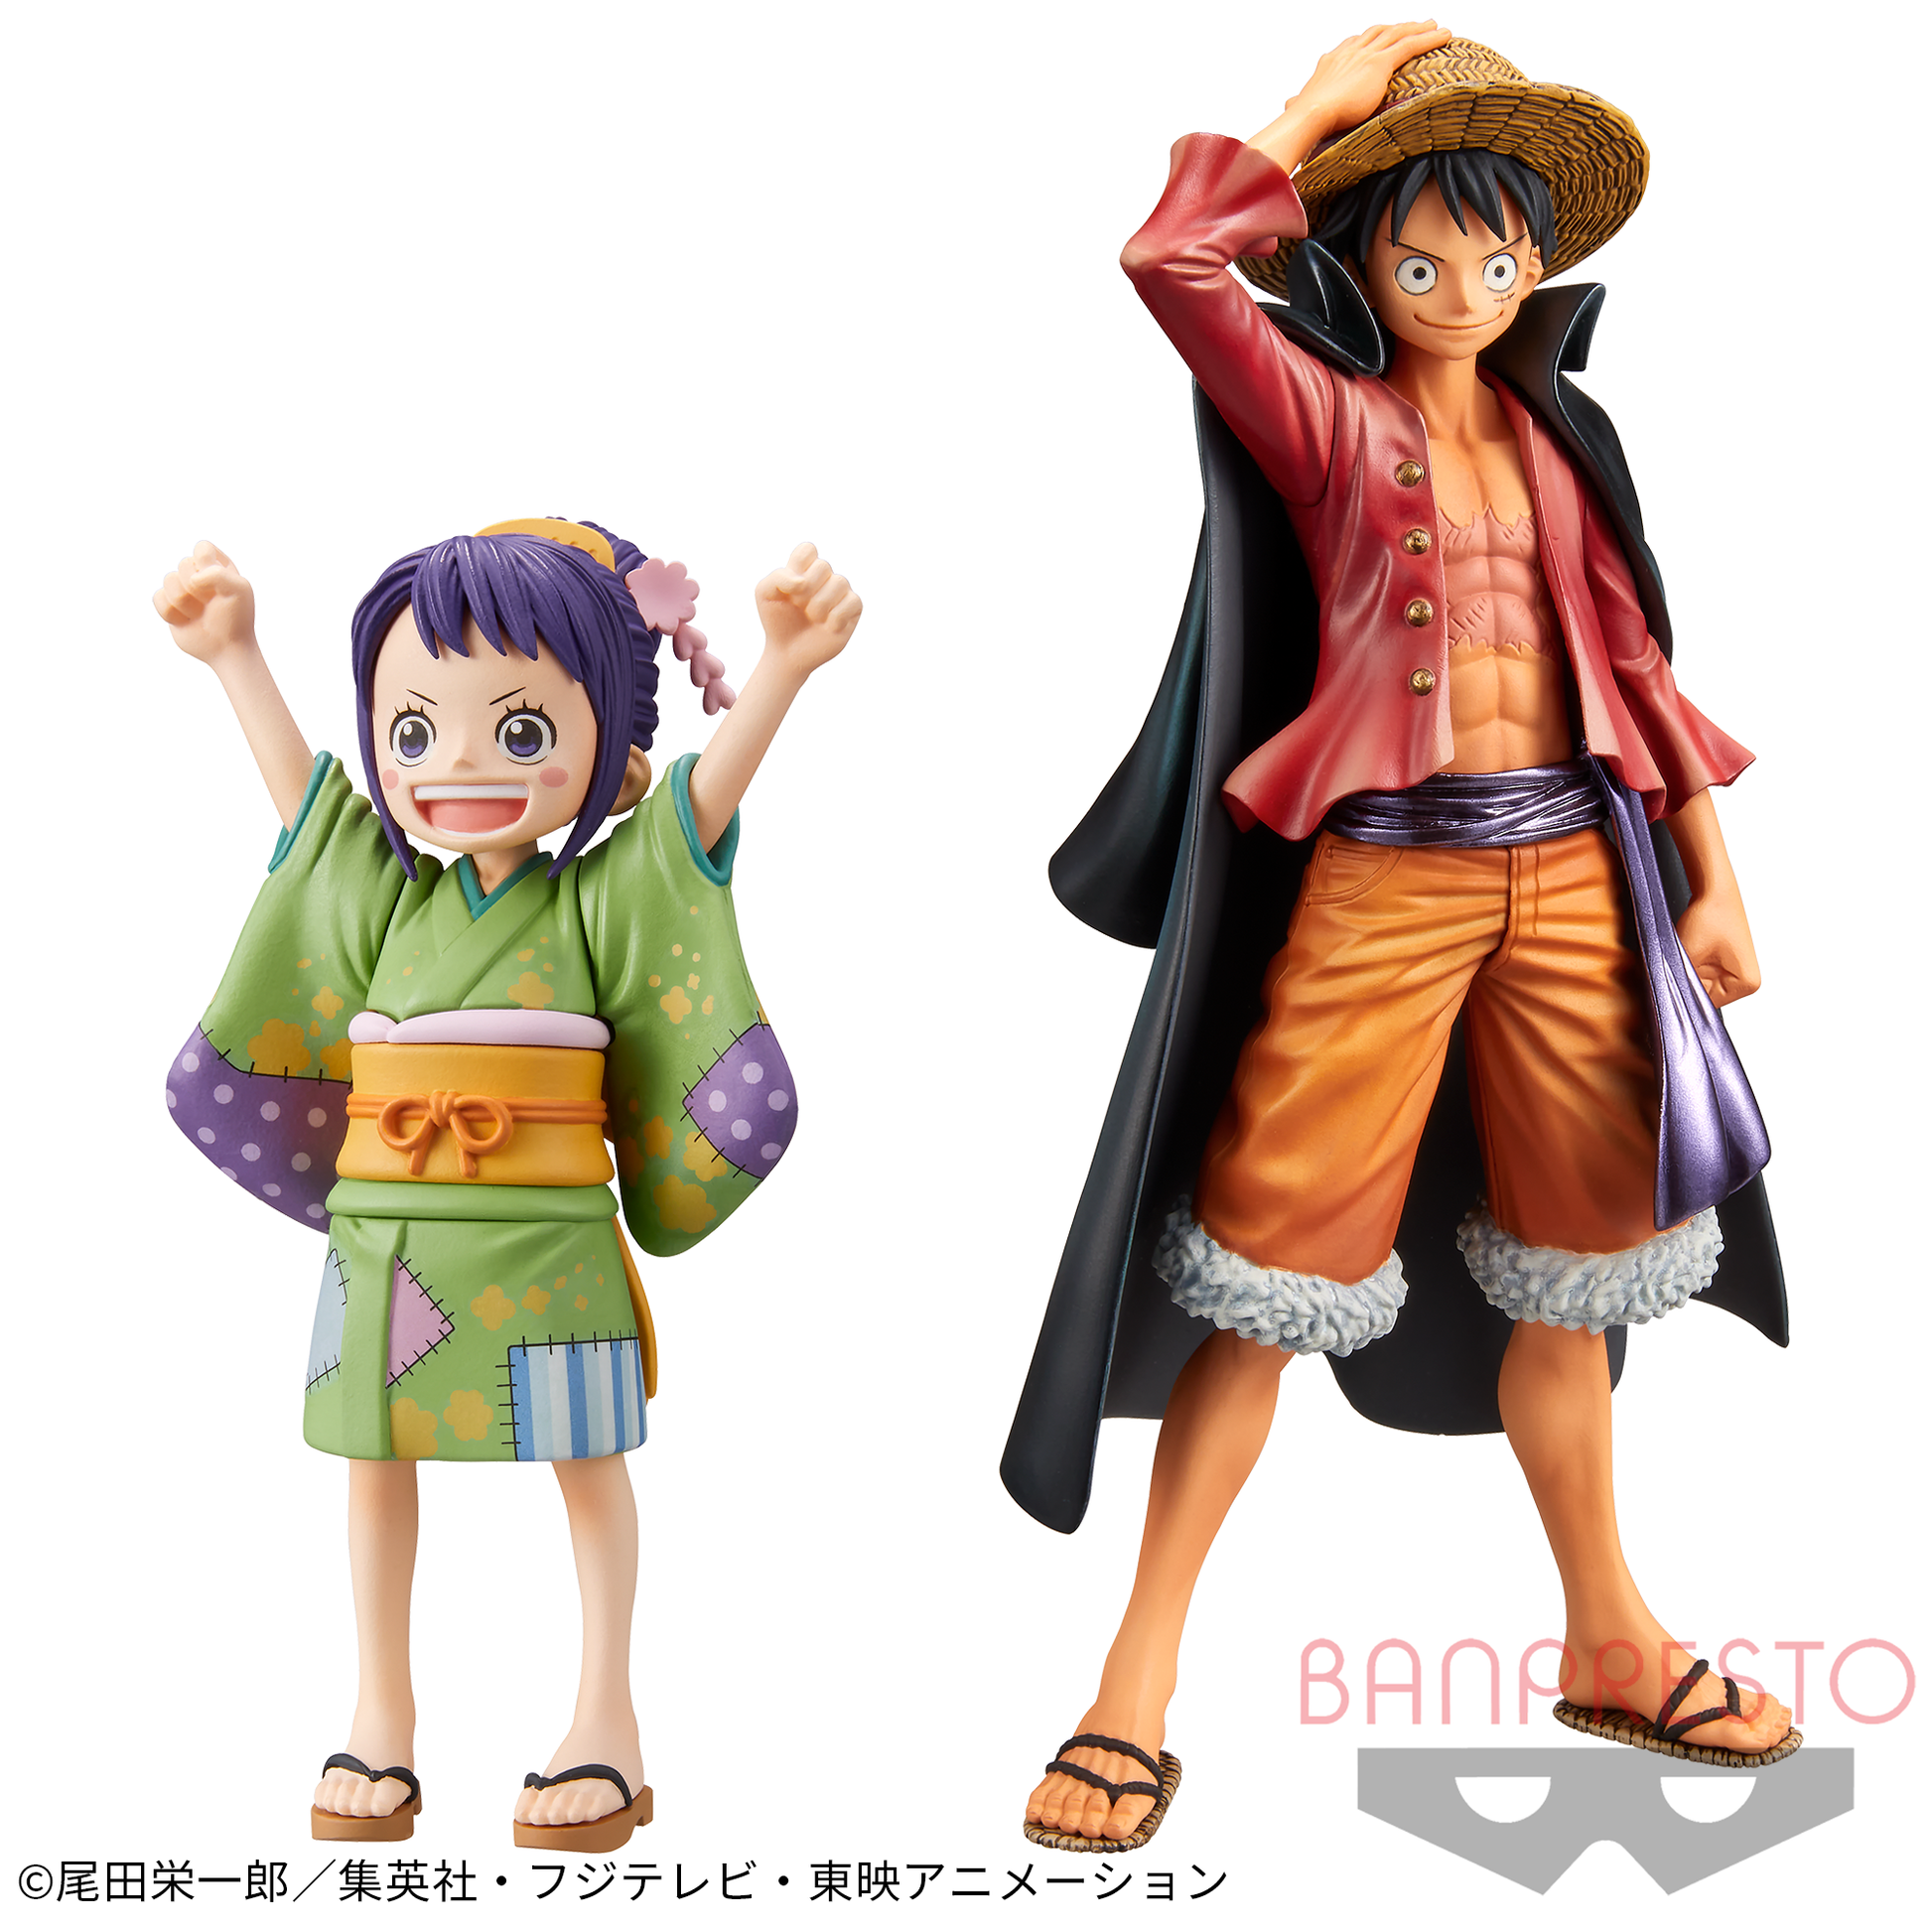 One Piece DXF The Grandline Series Wano Country Monkey D. Luffy